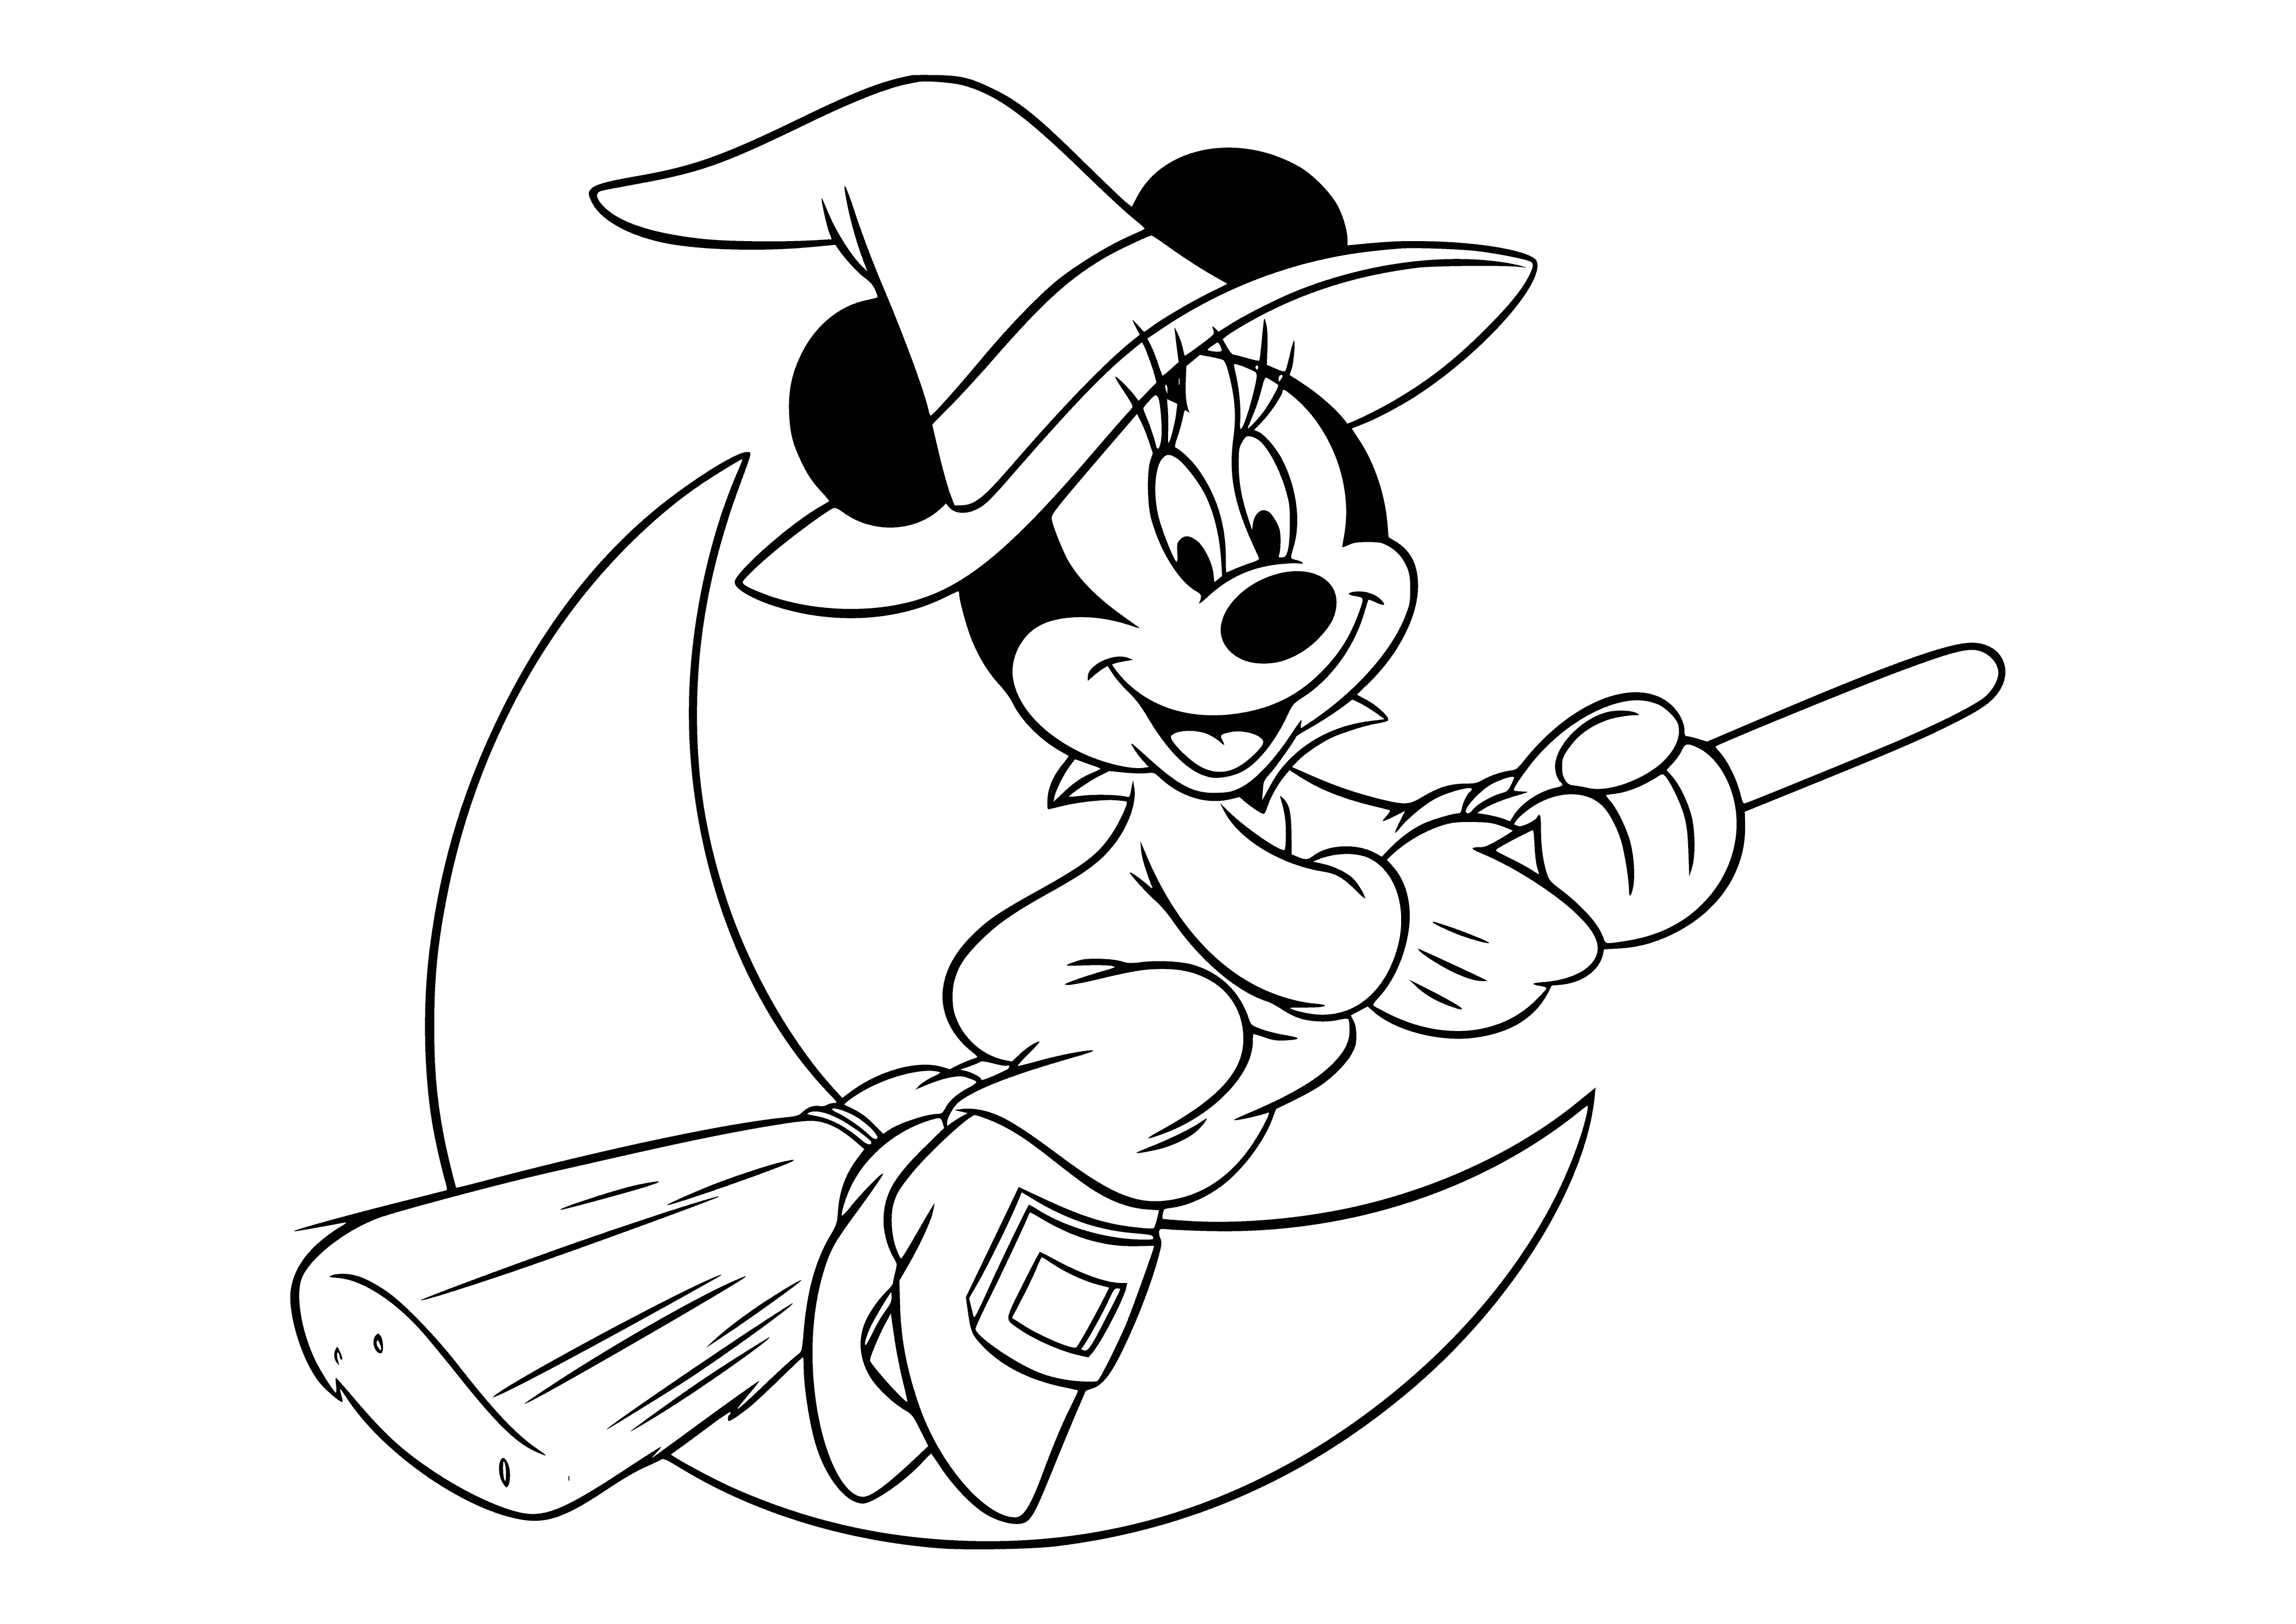 coloring page: Minnie Mouse flys a purple broom with green handle, wearing a black dress, white collar and cuffs, and a Witch's Hat.